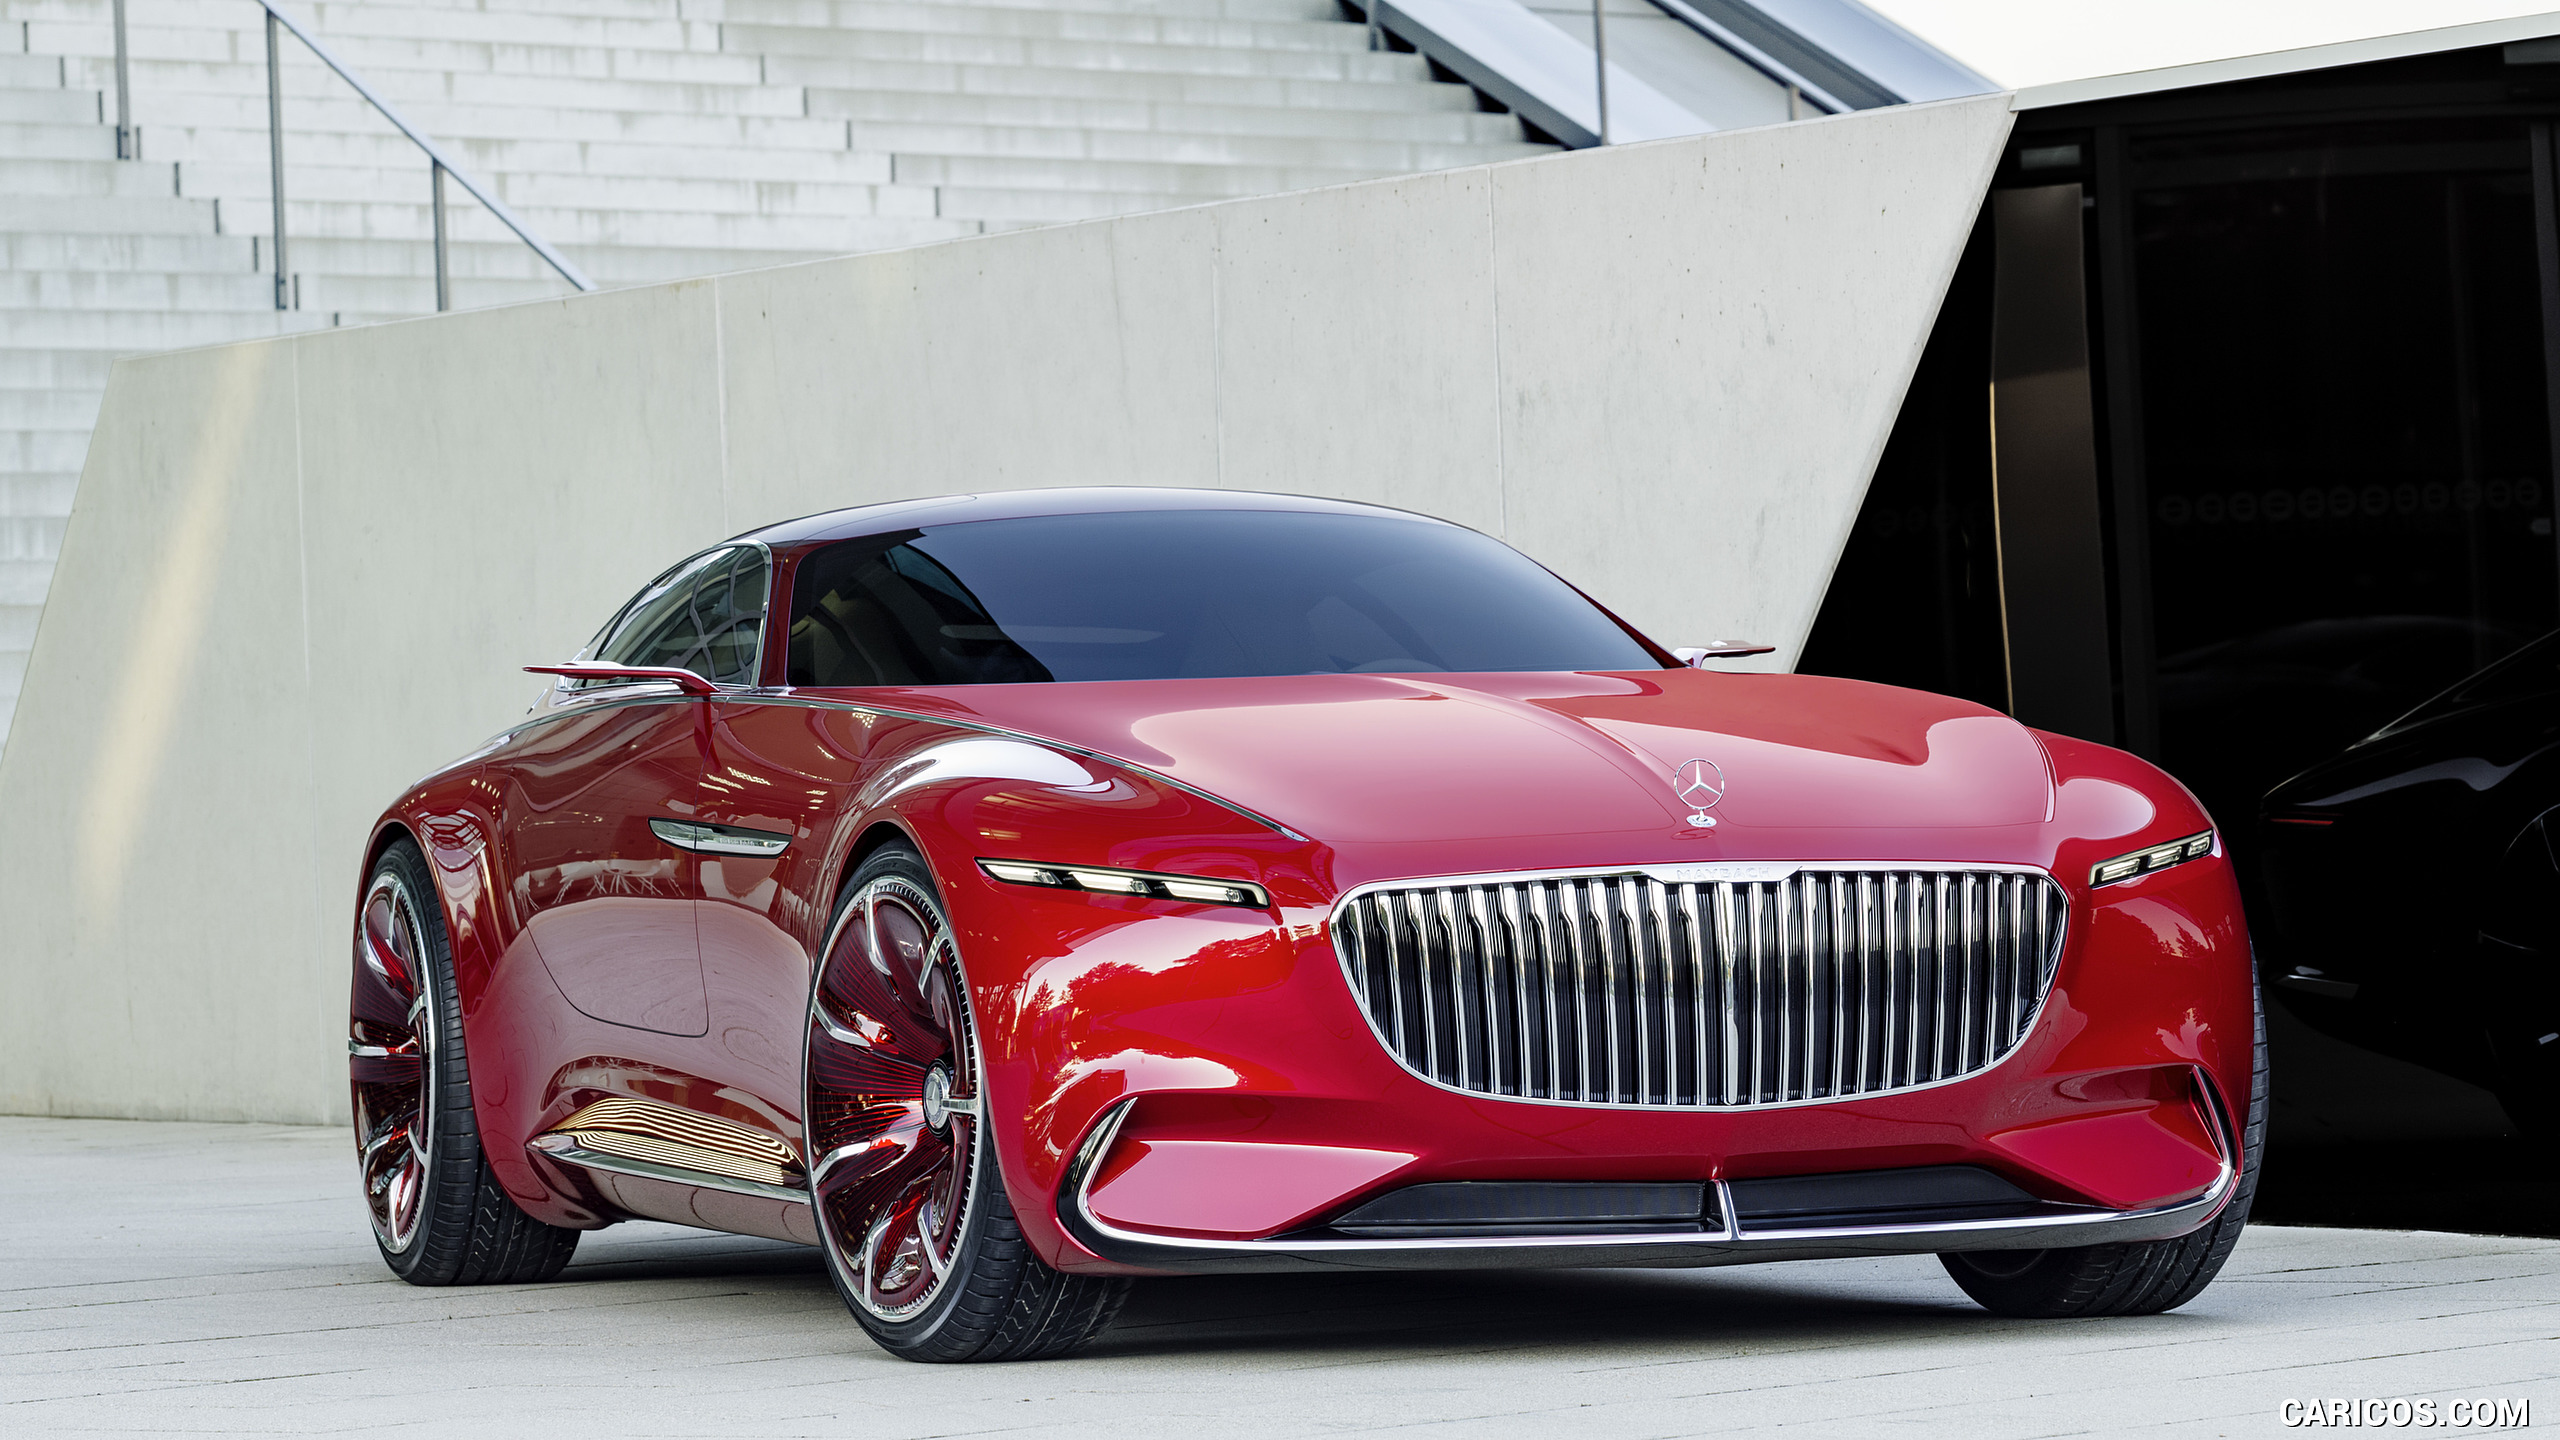 2016 Mercedes-Maybach 6 Concept - Front, #27 of 31